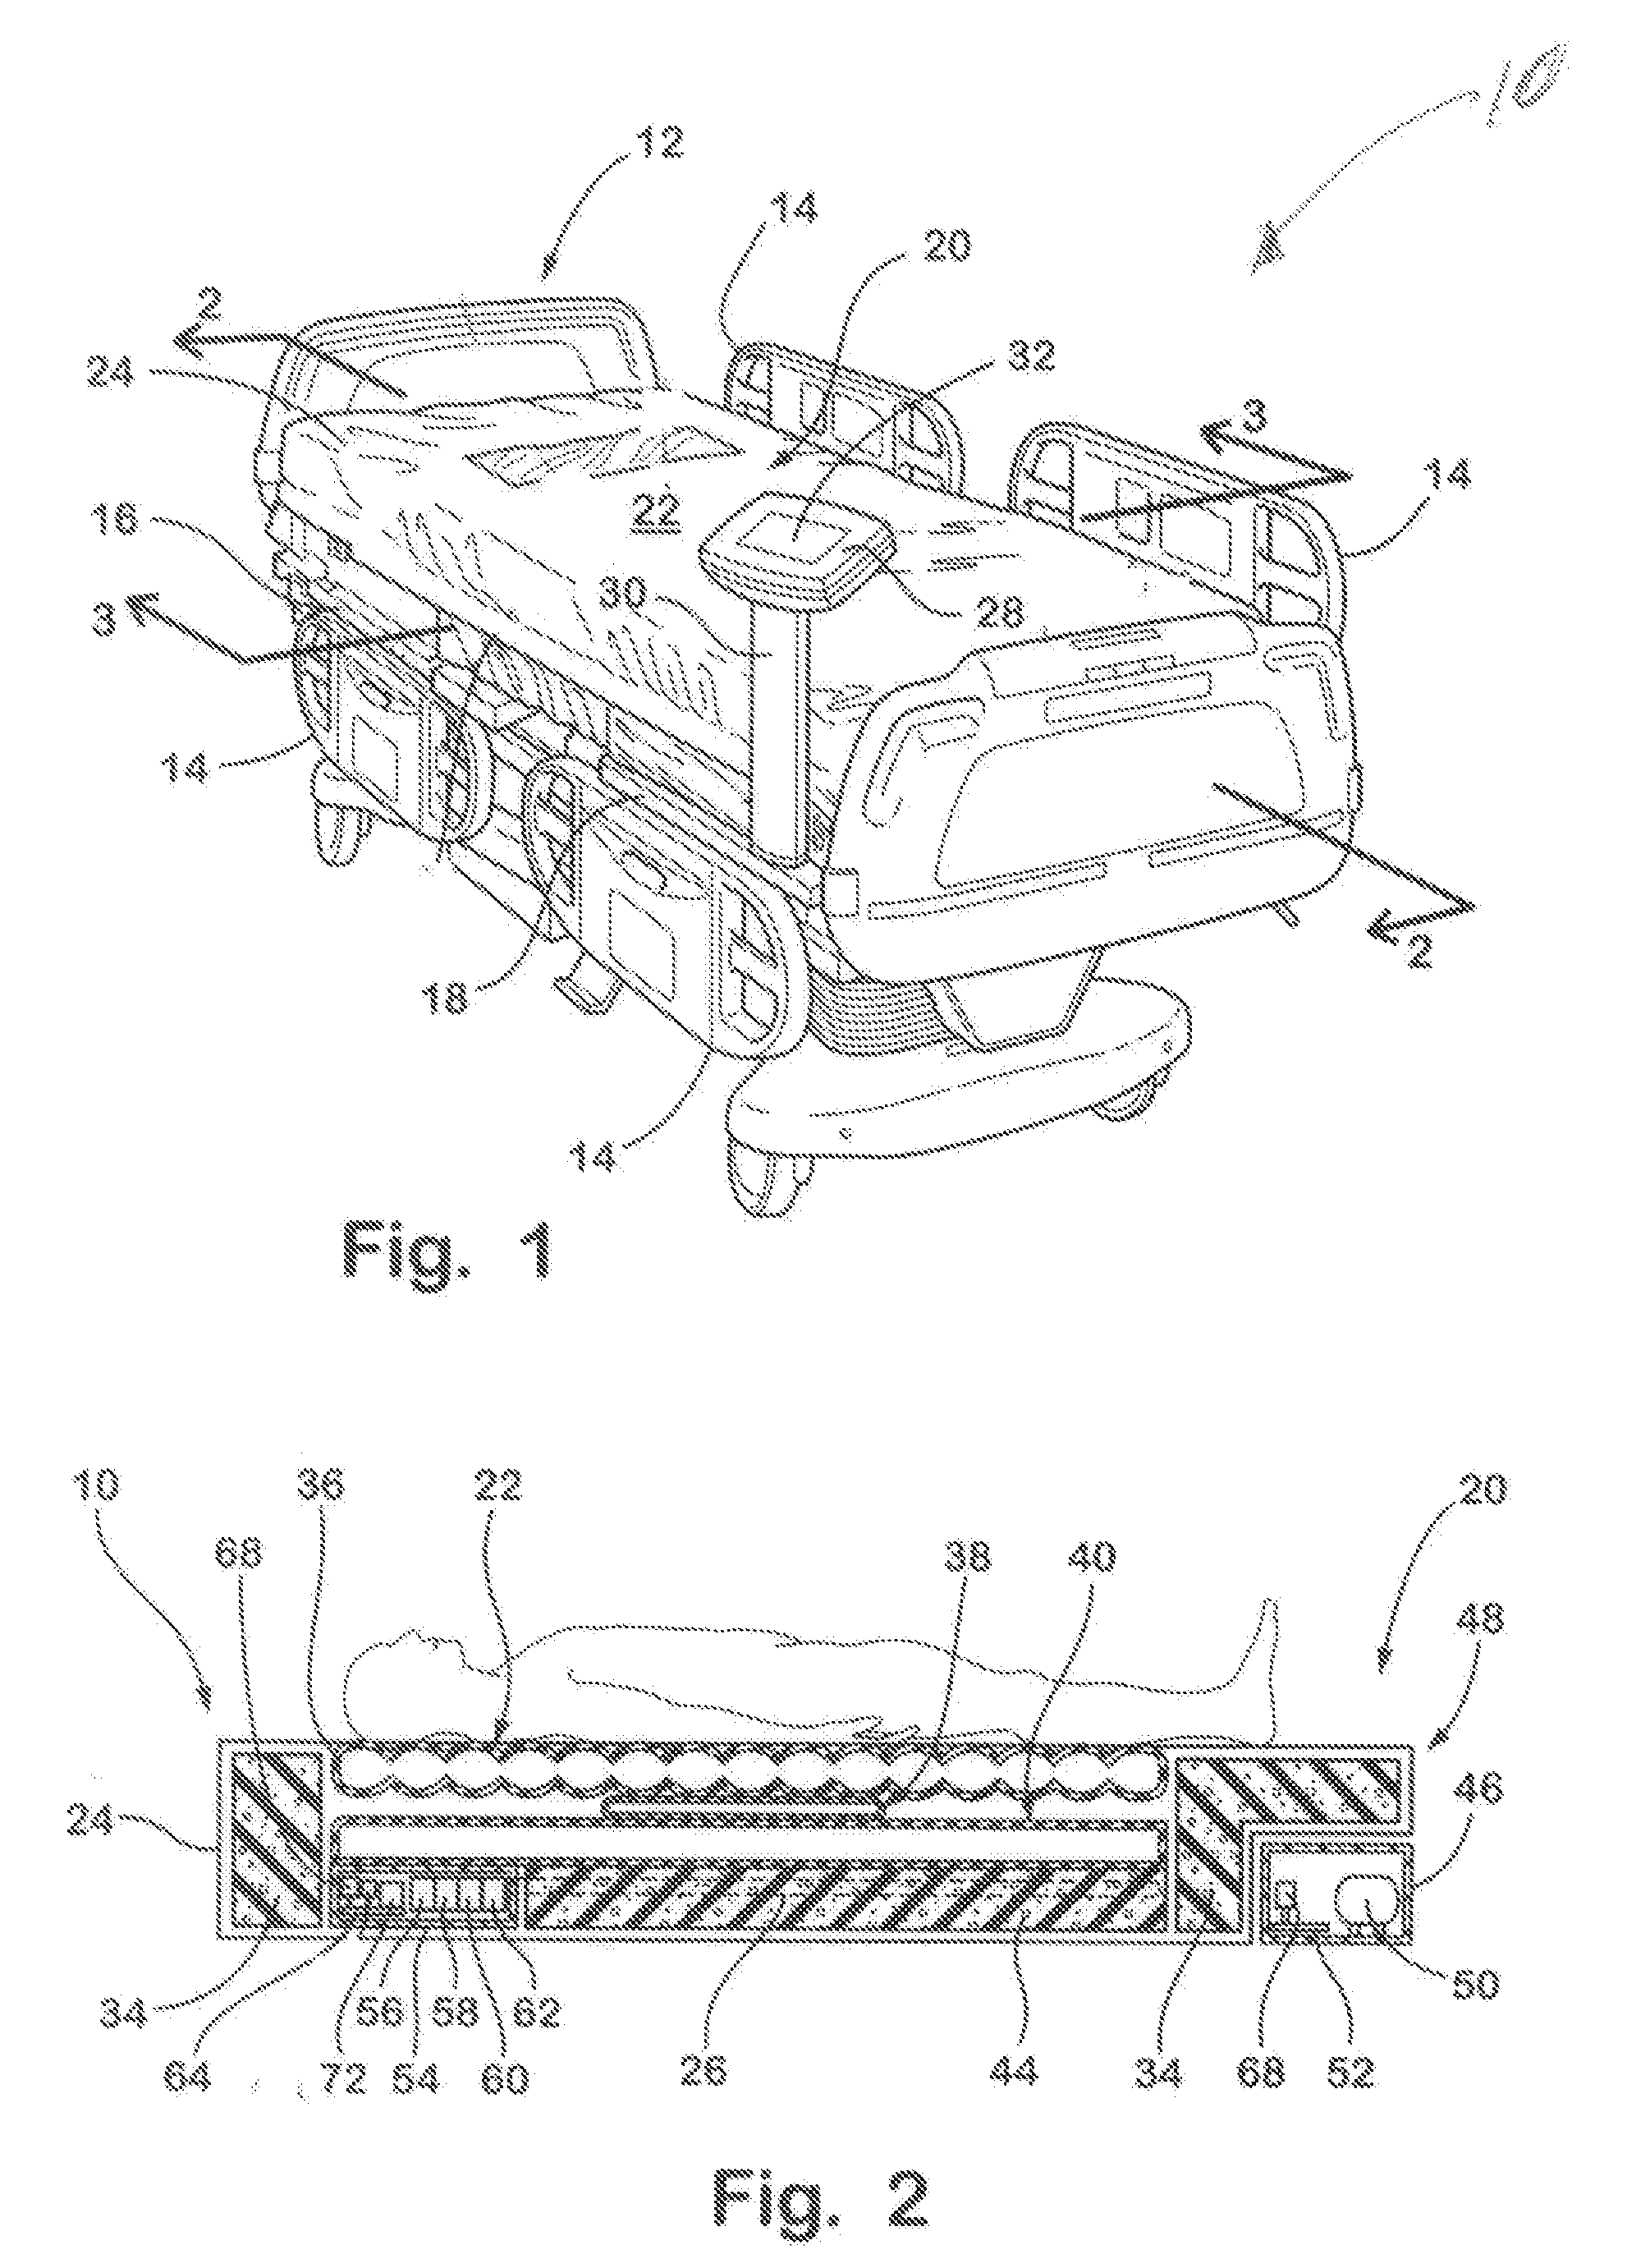 Vibrating patient support apparatus with a resonant referencing percussion device